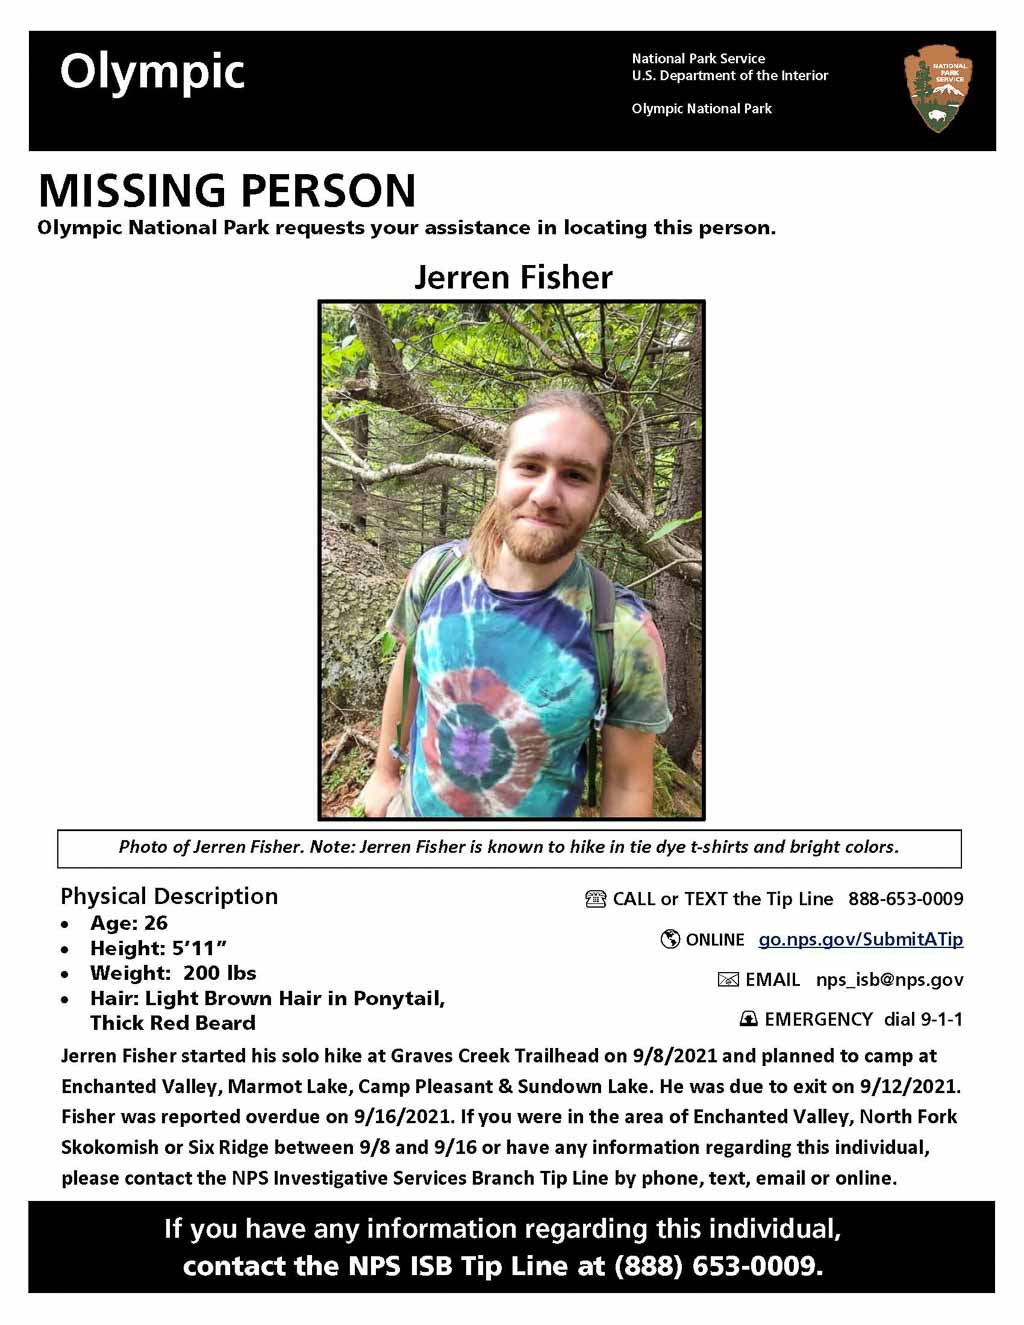 Missing Solo Backpacker Rescued in Olympic National Park poster - Image credit NPS